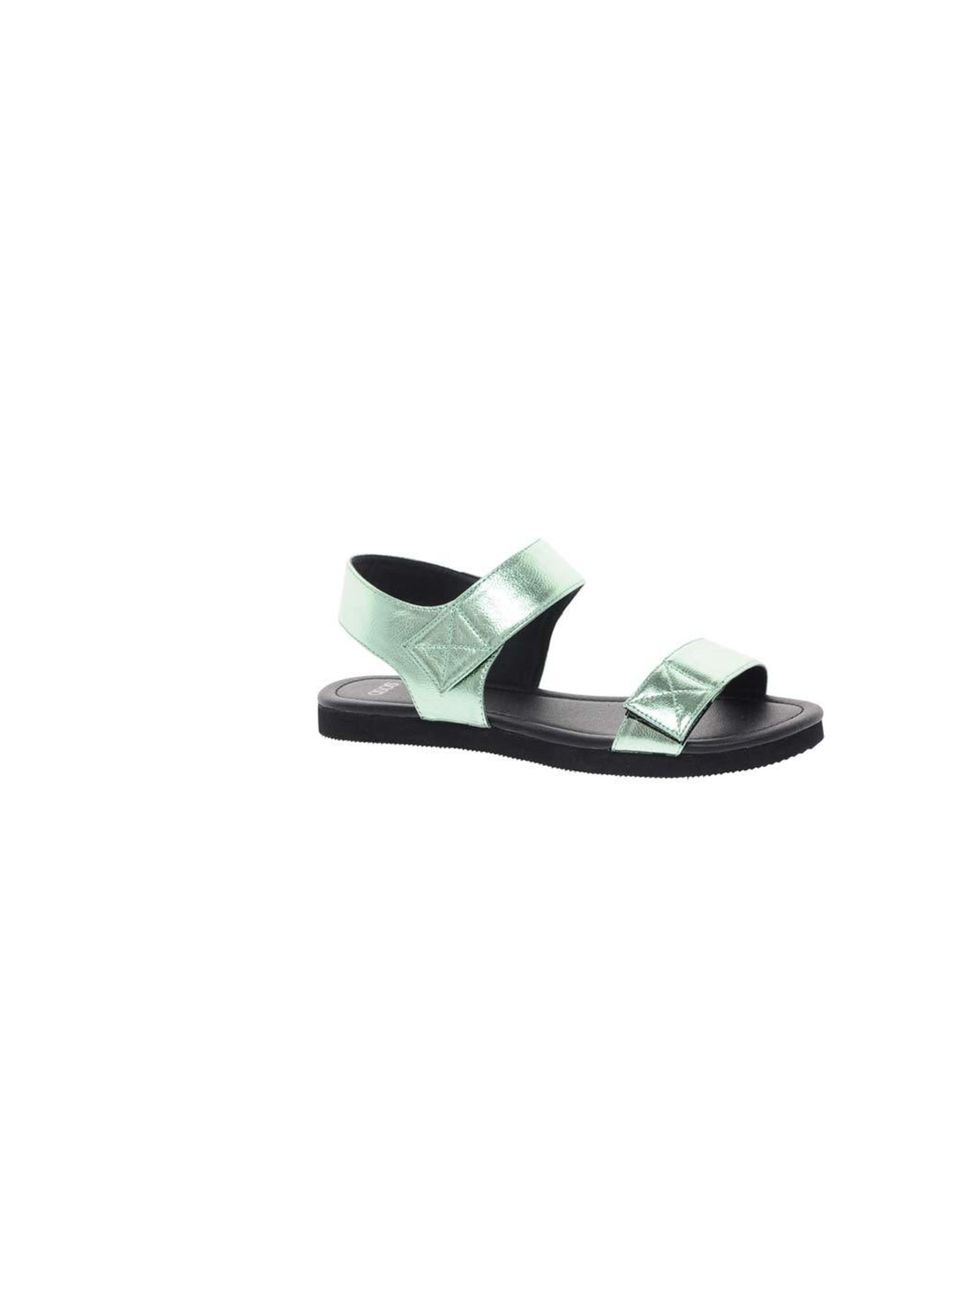 <p>The on-trend metallic finish and offbeat design put these sandals on the must-have list for Production & Bookings Assistant Melanie De La Cruz.</p><p><a href="http://www.asos.com/ASOS/ASOS-FILM-STAR-Flat-Sandals/Prod/pgeproduct.aspx?iid=2749218&cid=193